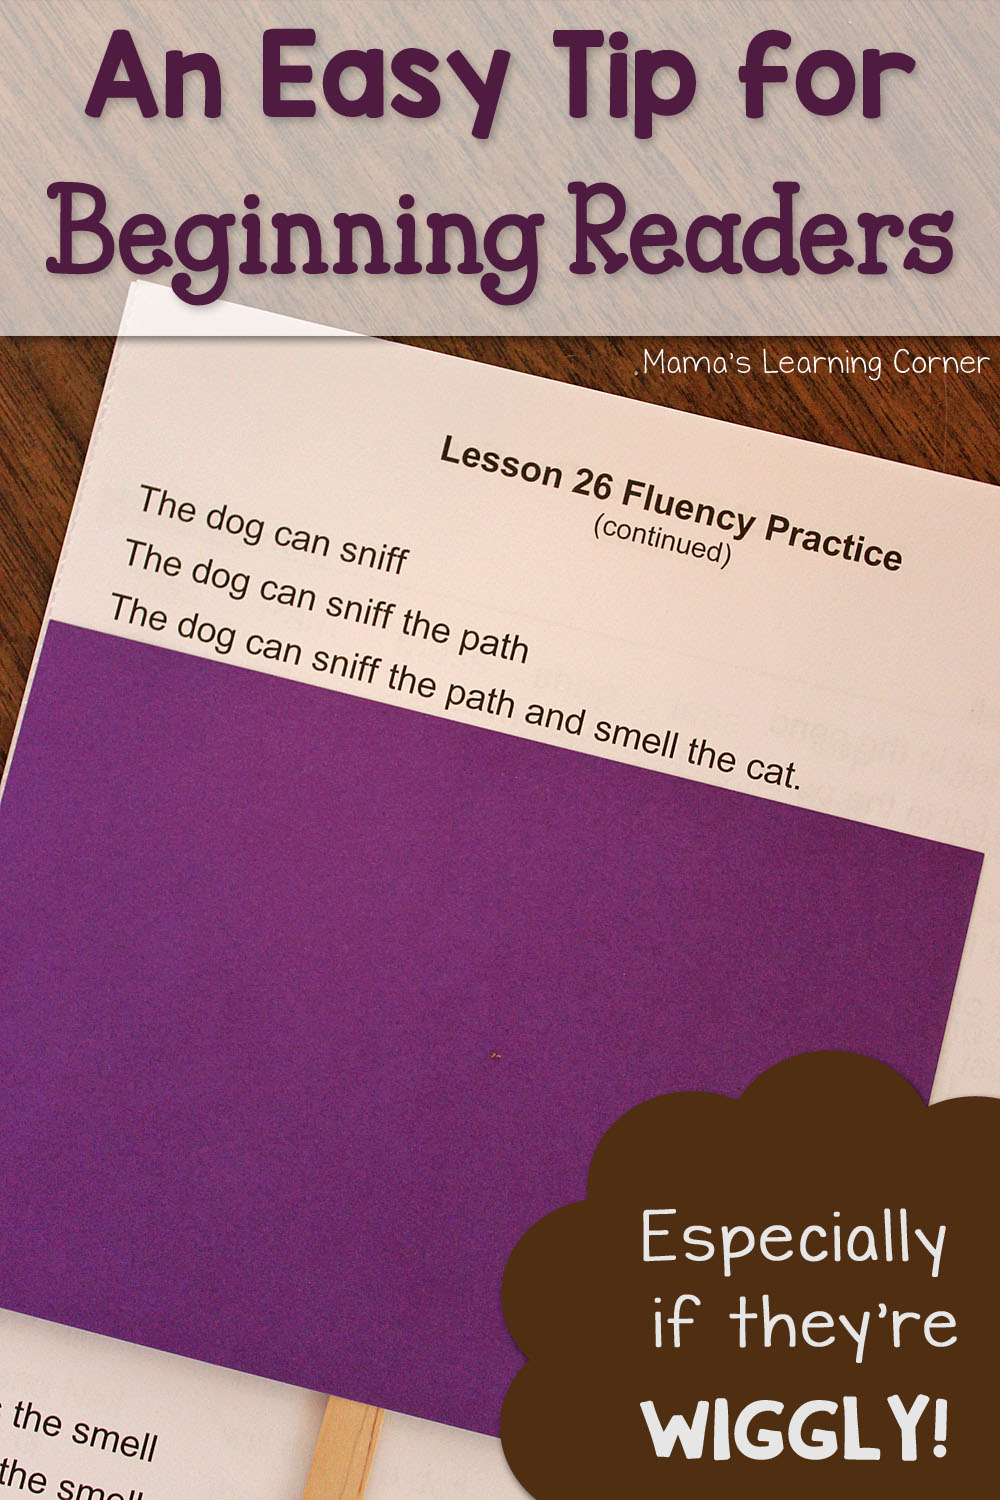 a-quick-easy-tip-for-beginning-readers-mamas-learning-corner